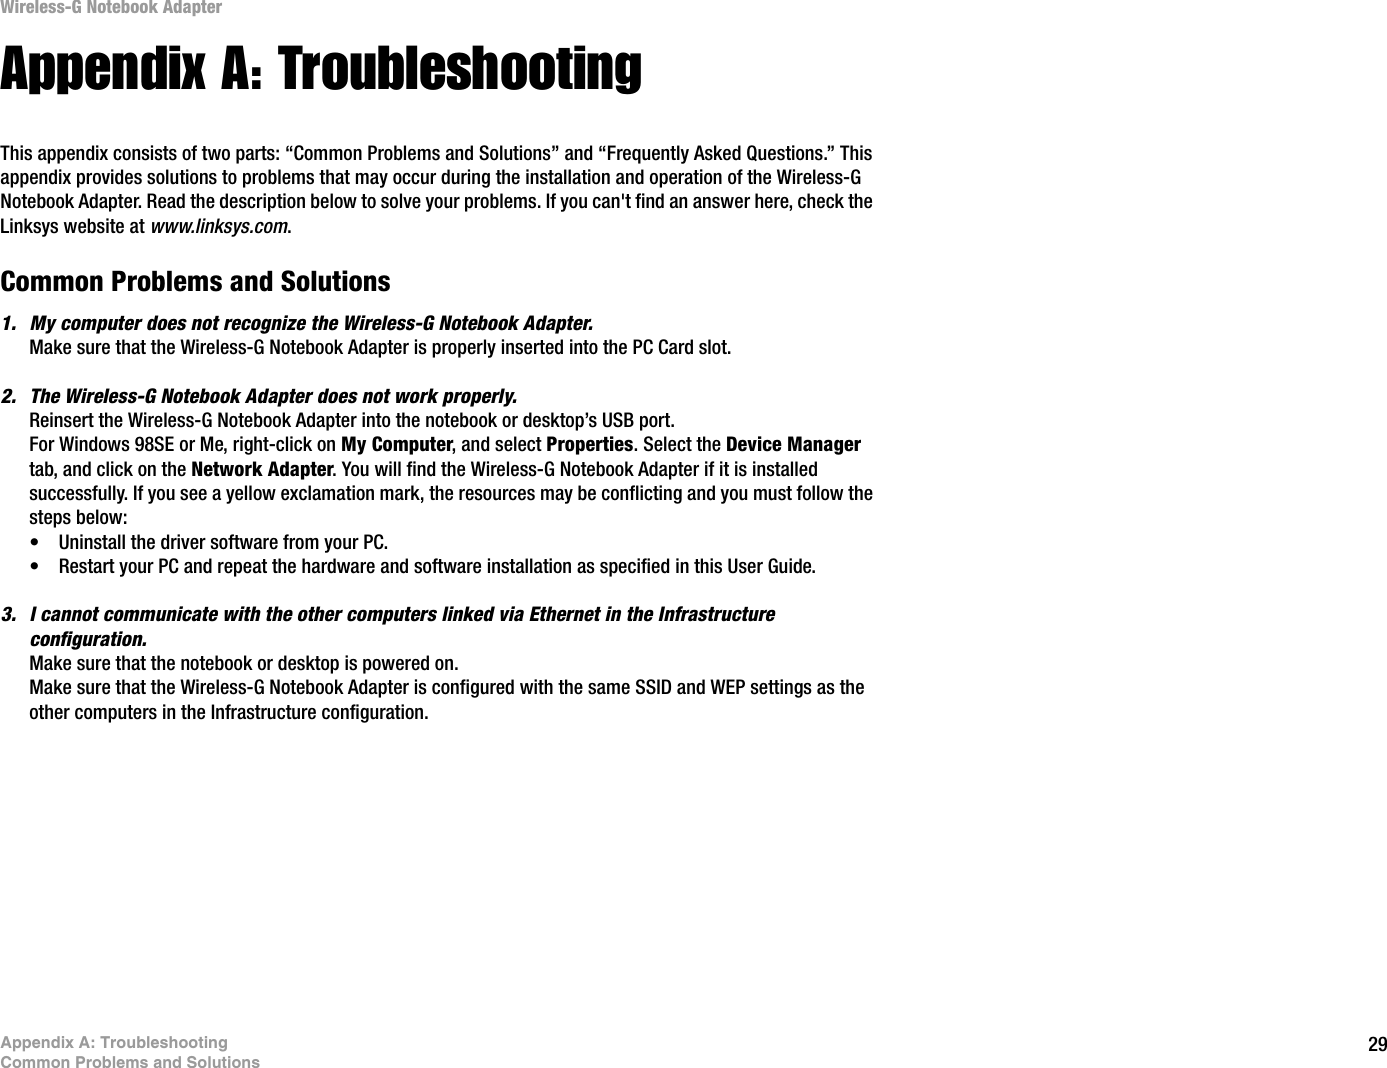 29Appendix A: TroubleshootingCommon Problems and SolutionsWireless-G Notebook AdapterAppendix A: TroubleshootingThis appendix consists of two parts: “Common Problems and Solutions” and “Frequently Asked Questions.” This appendix provides solutions to problems that may occur during the installation and operation of the Wireless-G Notebook Adapter. Read the description below to solve your problems. If you can&apos;t find an answer here, check the Linksys website at www.linksys.com.Common Problems and Solutions1. My computer does not recognize the Wireless-G Notebook Adapter.Make sure that the Wireless-G Notebook Adapter is properly inserted into the PC Card slot.2. The Wireless-G Notebook Adapter does not work properly.Reinsert the Wireless-G Notebook Adapter into the notebook or desktop’s USB port. For Windows 98SE or Me, right-click on My Computer, and select Properties. Select the Device Managertab, and click on the Network Adapter. You will find the Wireless-G Notebook Adapter if it is installed successfully. If you see a yellow exclamation mark, the resources may be conflicting and you must follow the steps below:• Uninstall the driver software from your PC.• Restart your PC and repeat the hardware and software installation as specified in this User Guide.3. I cannot communicate with the other computers linked via Ethernet in the Infrastructure configuration.Make sure that the notebook or desktop is powered on.Make sure that the Wireless-G Notebook Adapter is configured with the same SSID and WEP settings as the other computers in the Infrastructure configuration.